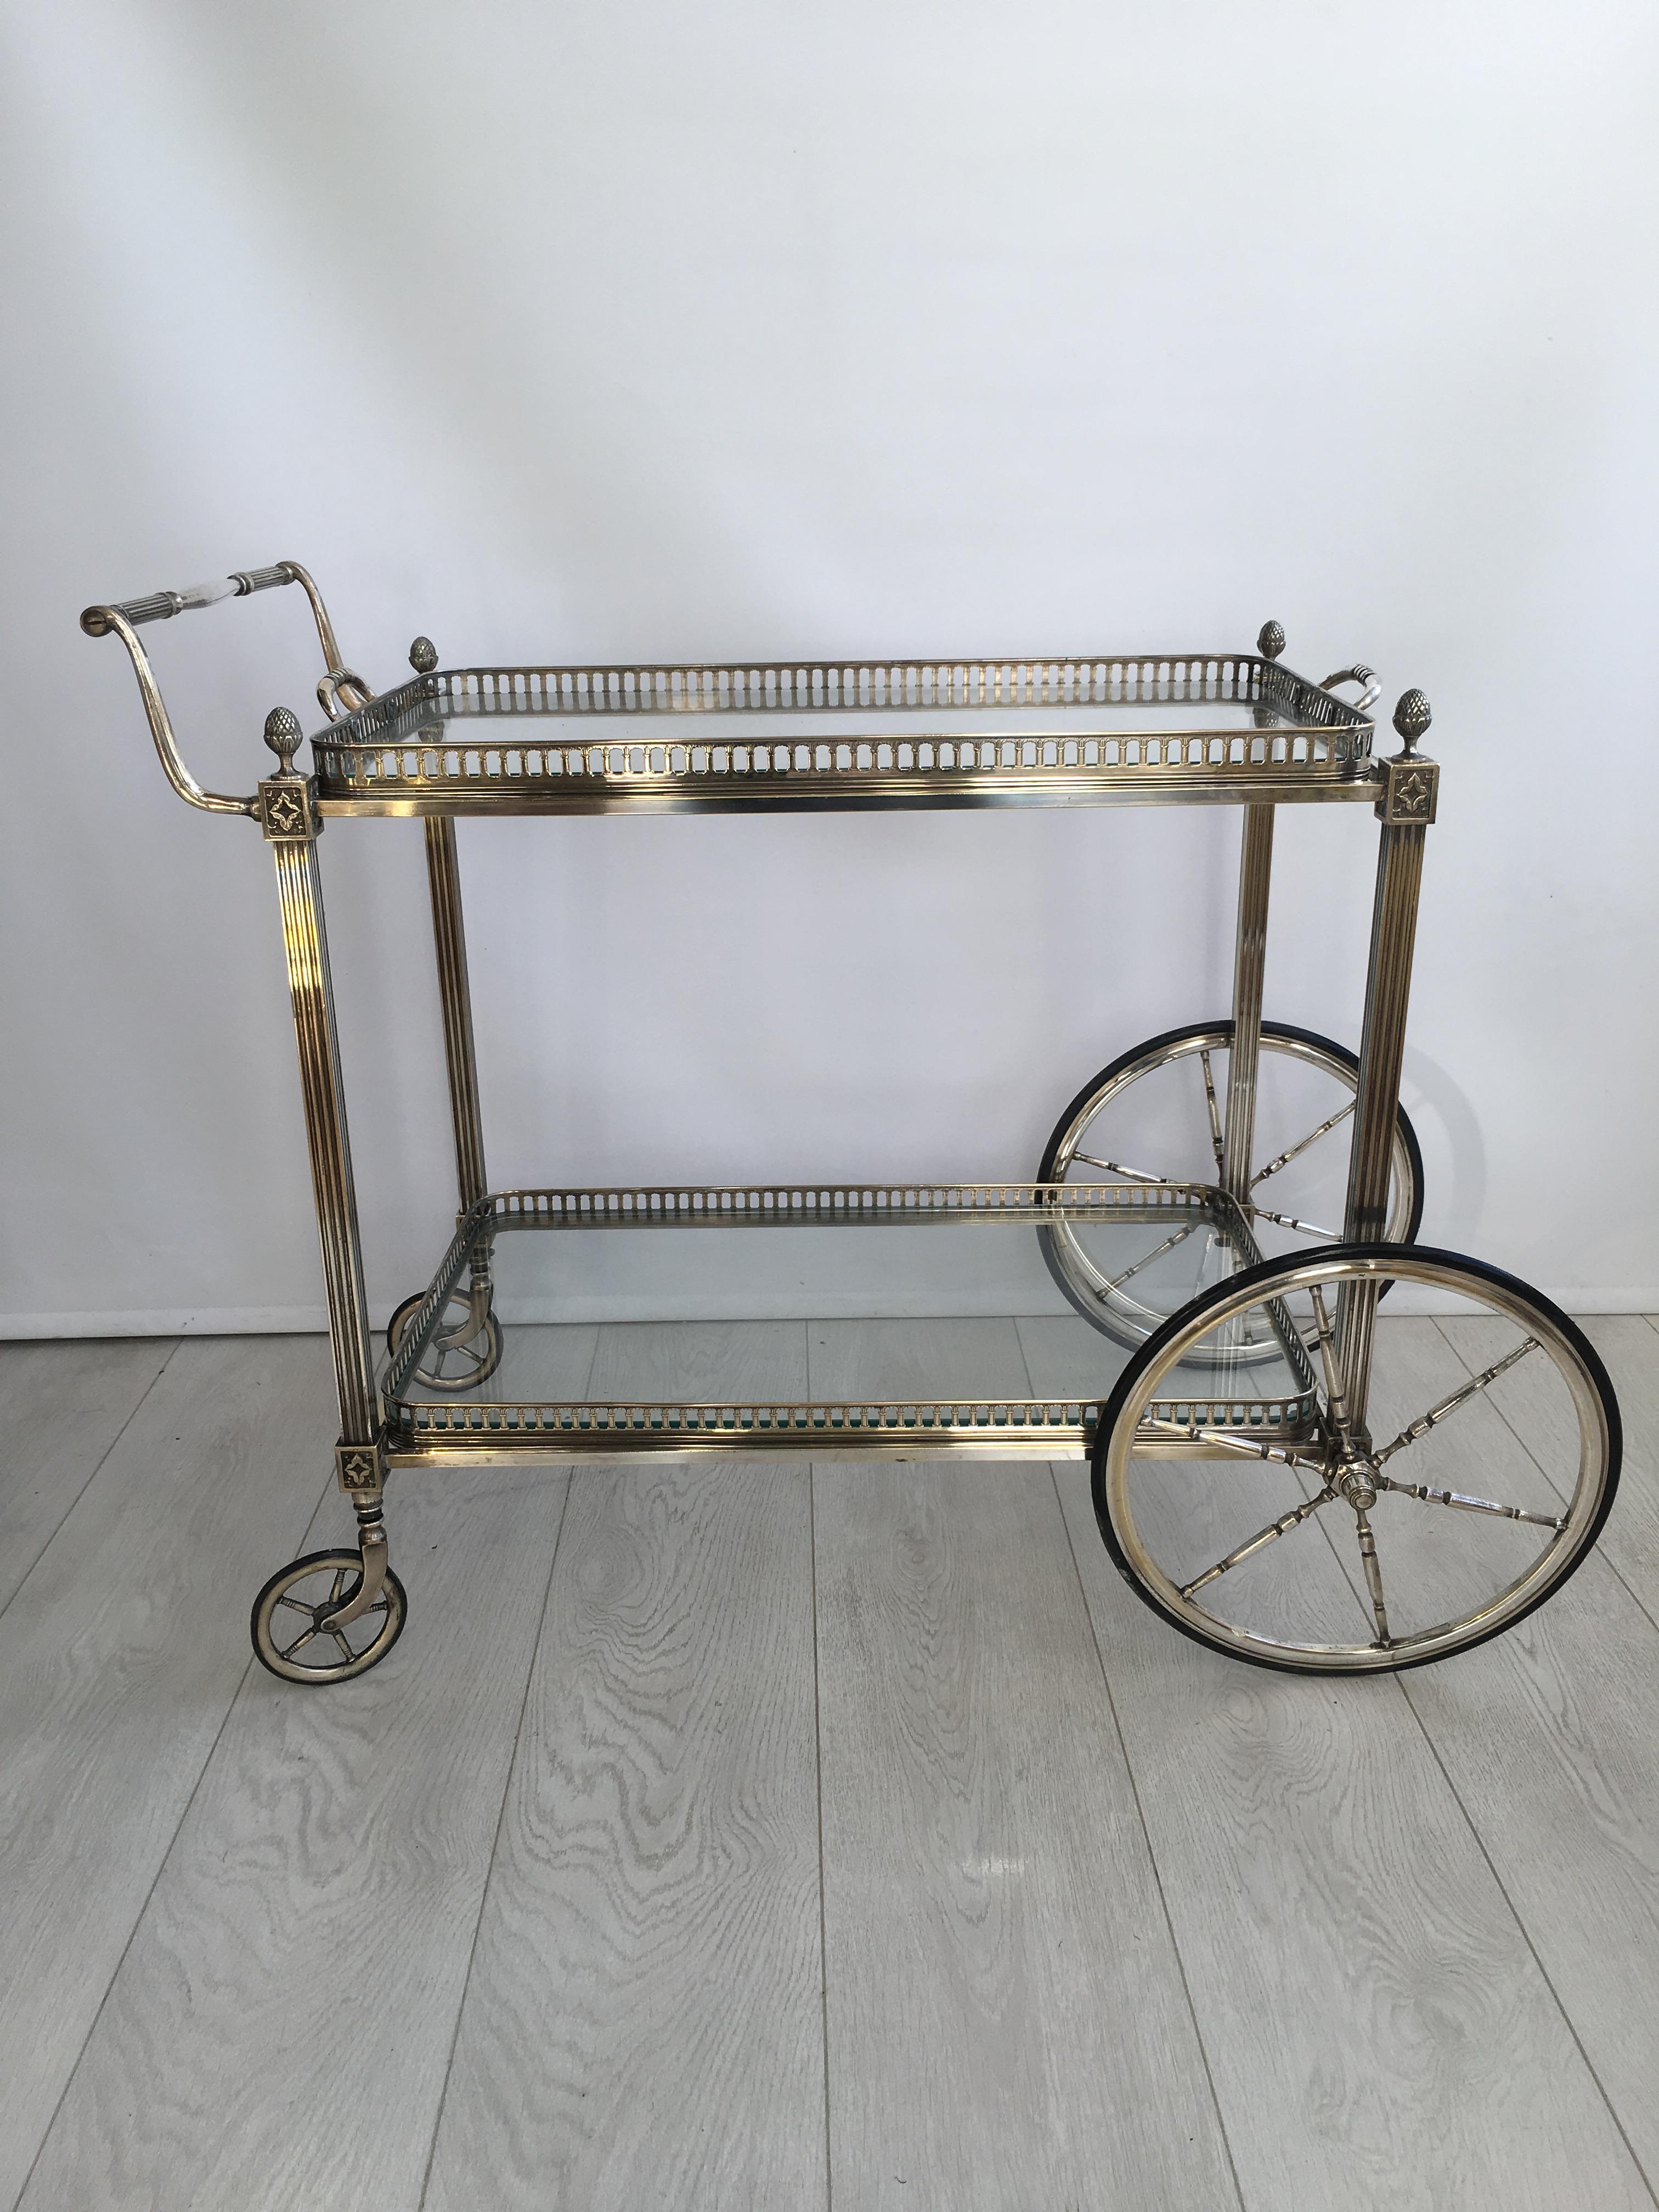 Classic vintage drinks trolley from France, circa 1950 with lift off tray.

Polished silver finish with lovely coloring, going back to the brass in places (please see close up images).

Decorative finials with reeded legs and bottle holder to